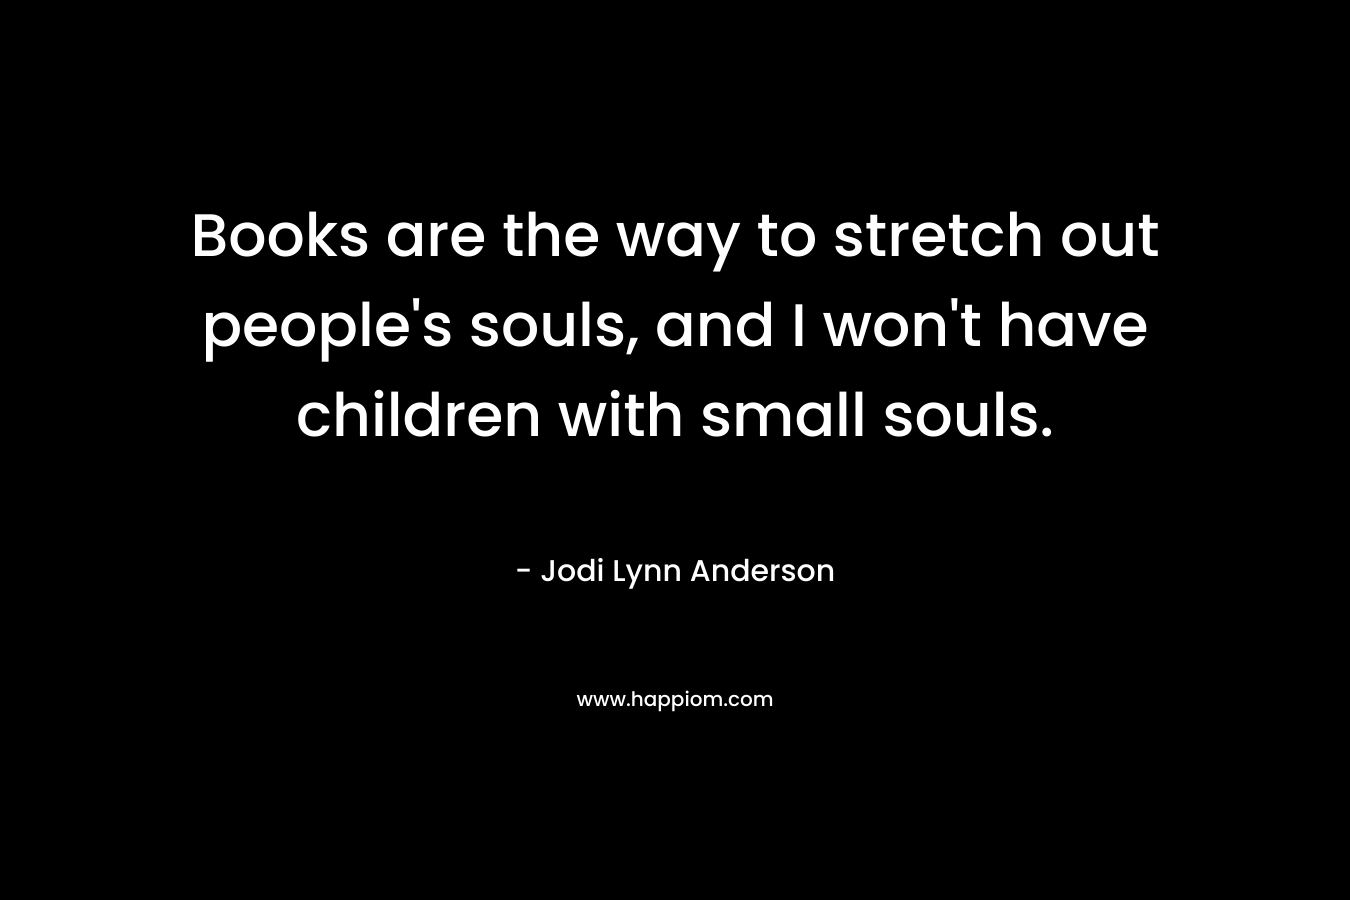 Books are the way to stretch out people's souls, and I won't have children with small souls.